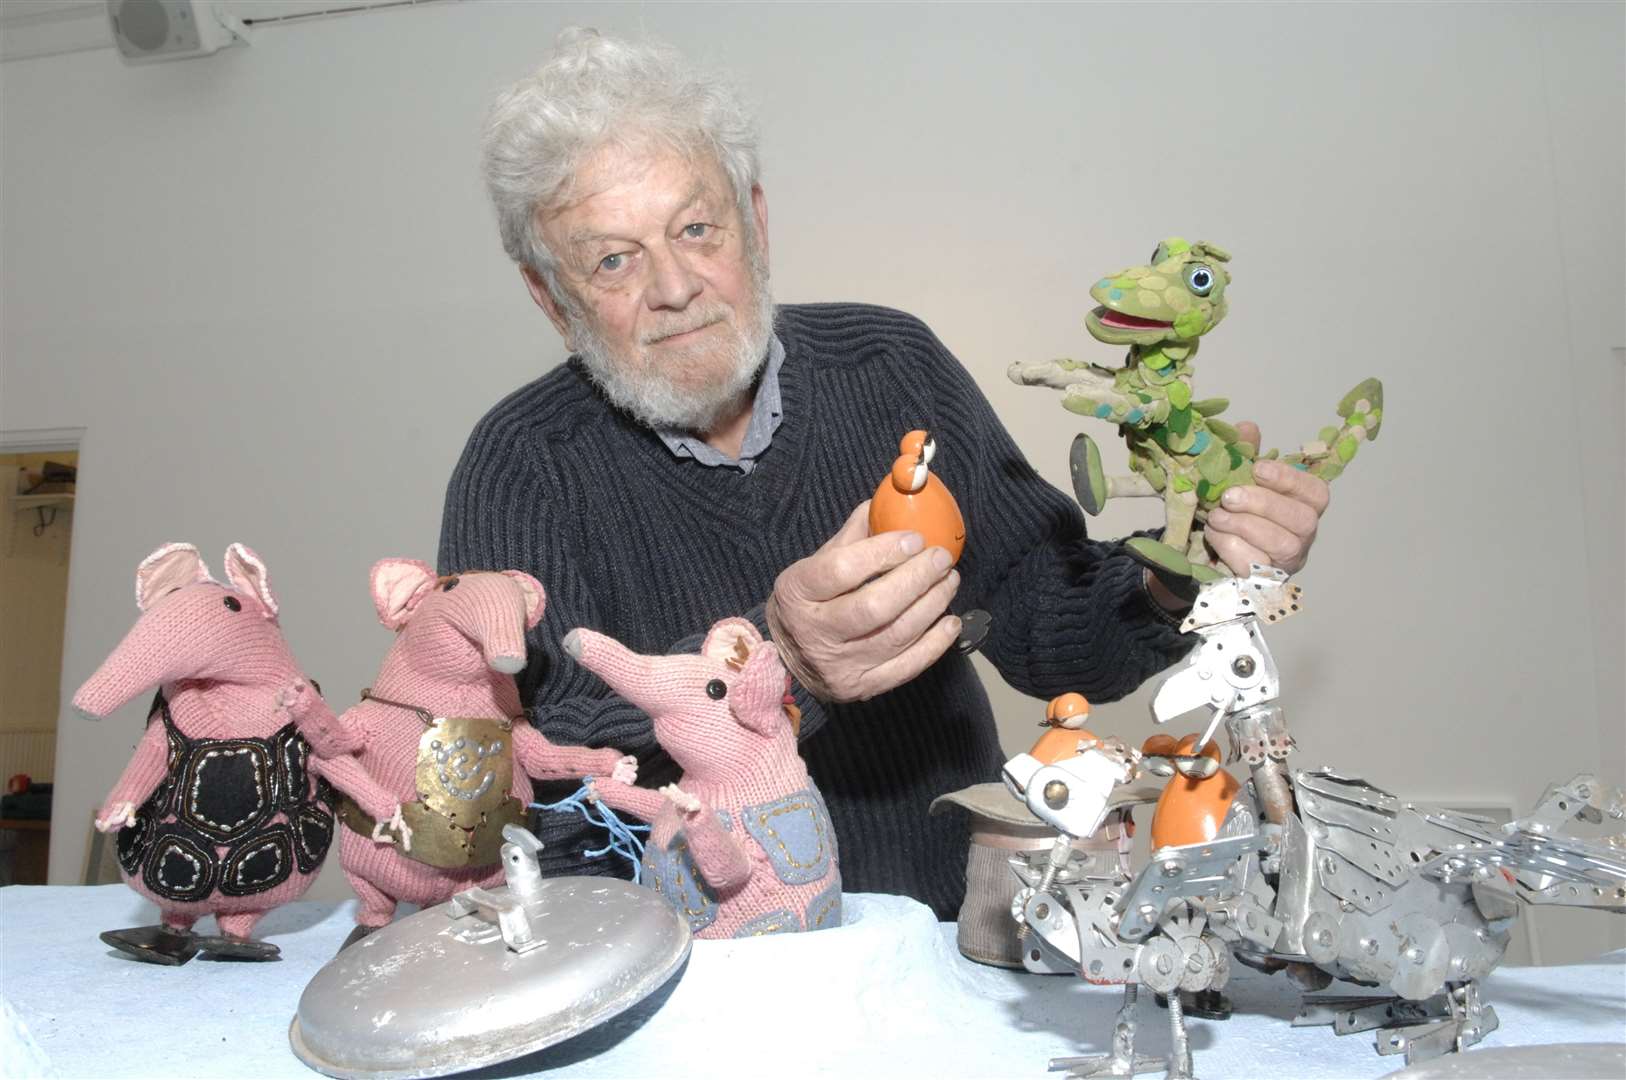 Peter Firmin was asked by Ivan Owen to create the original Basil Brush puppet - and regularly carried out repairs